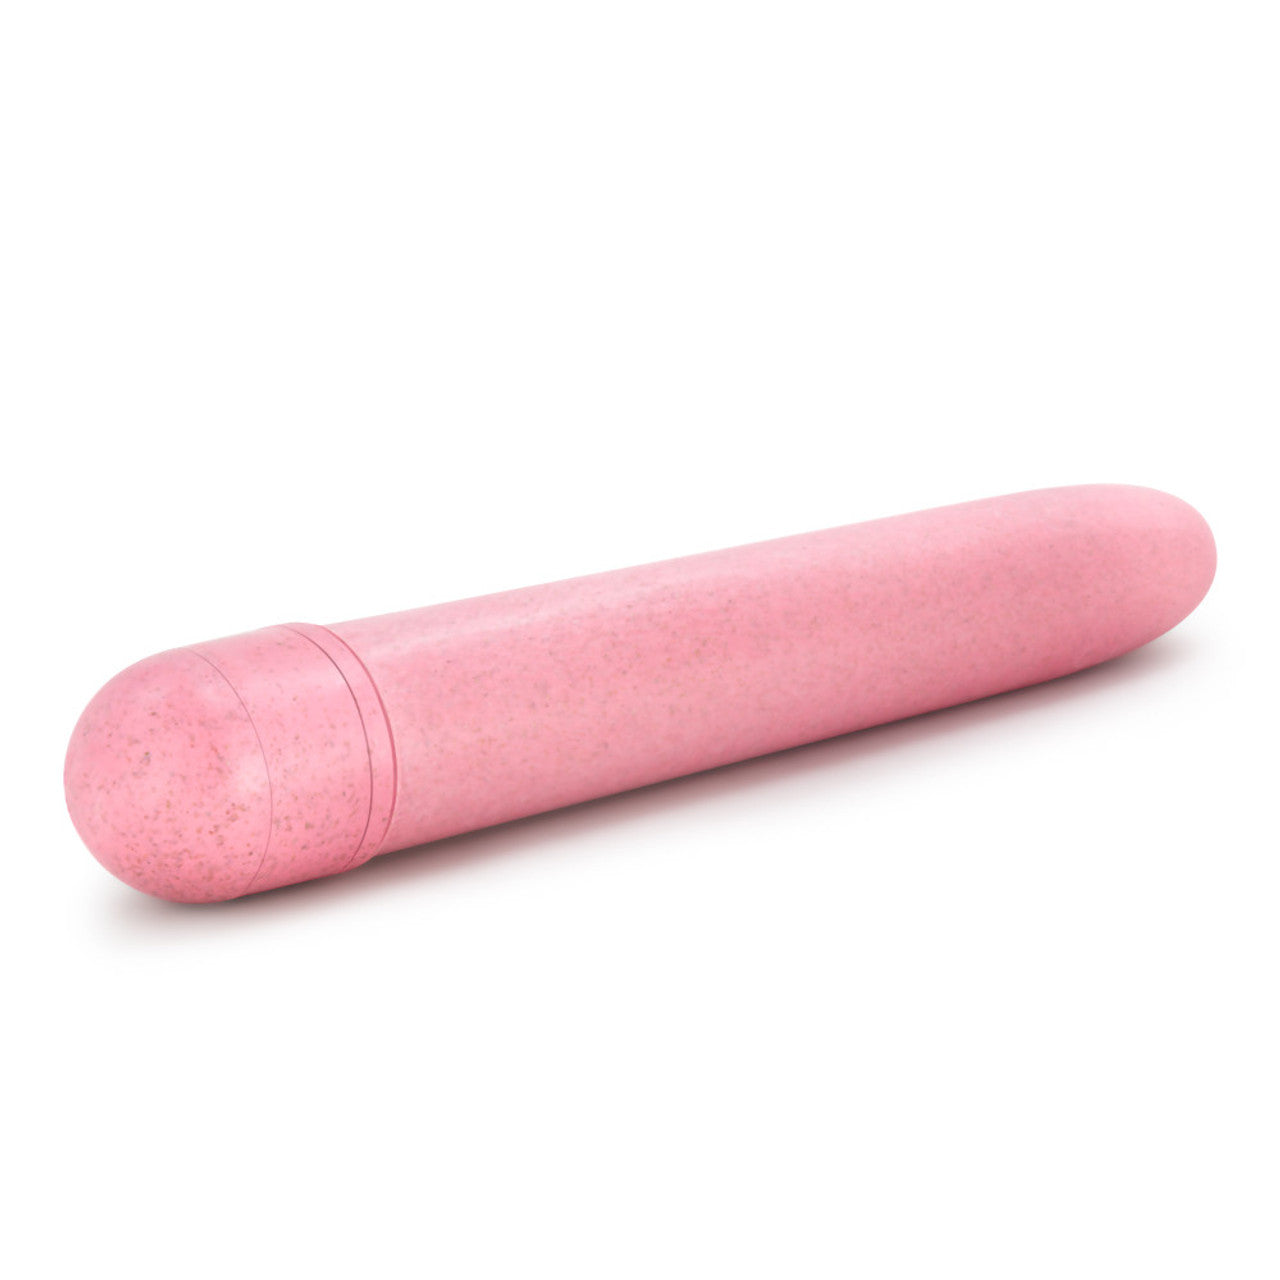 Gaia Eco Biadegradable Vibrator - Coral - Thorn & Feather Sex Toy Canada